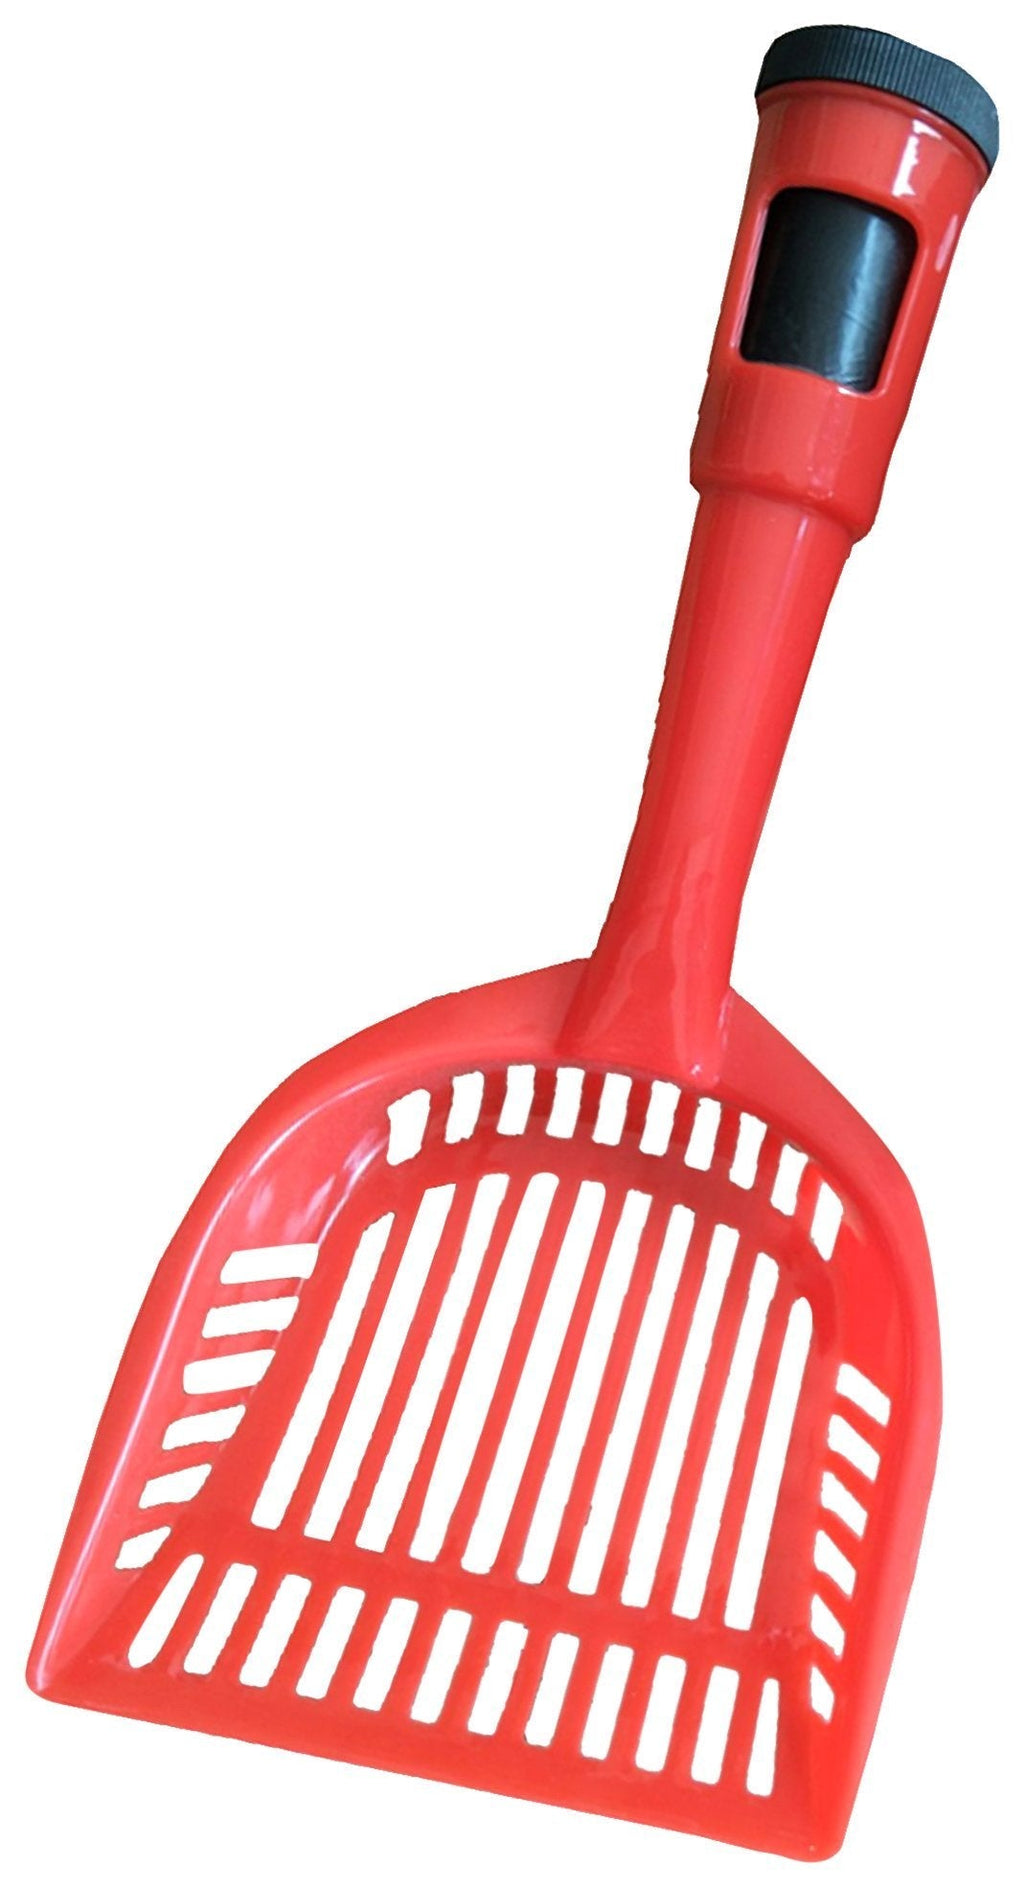 [Australia] - Pet Life Poopin-Scoopin Dog and Cat Pooper Scooper Litter Shovel with Built-in Waste Bag Handle Holster Red One Size 